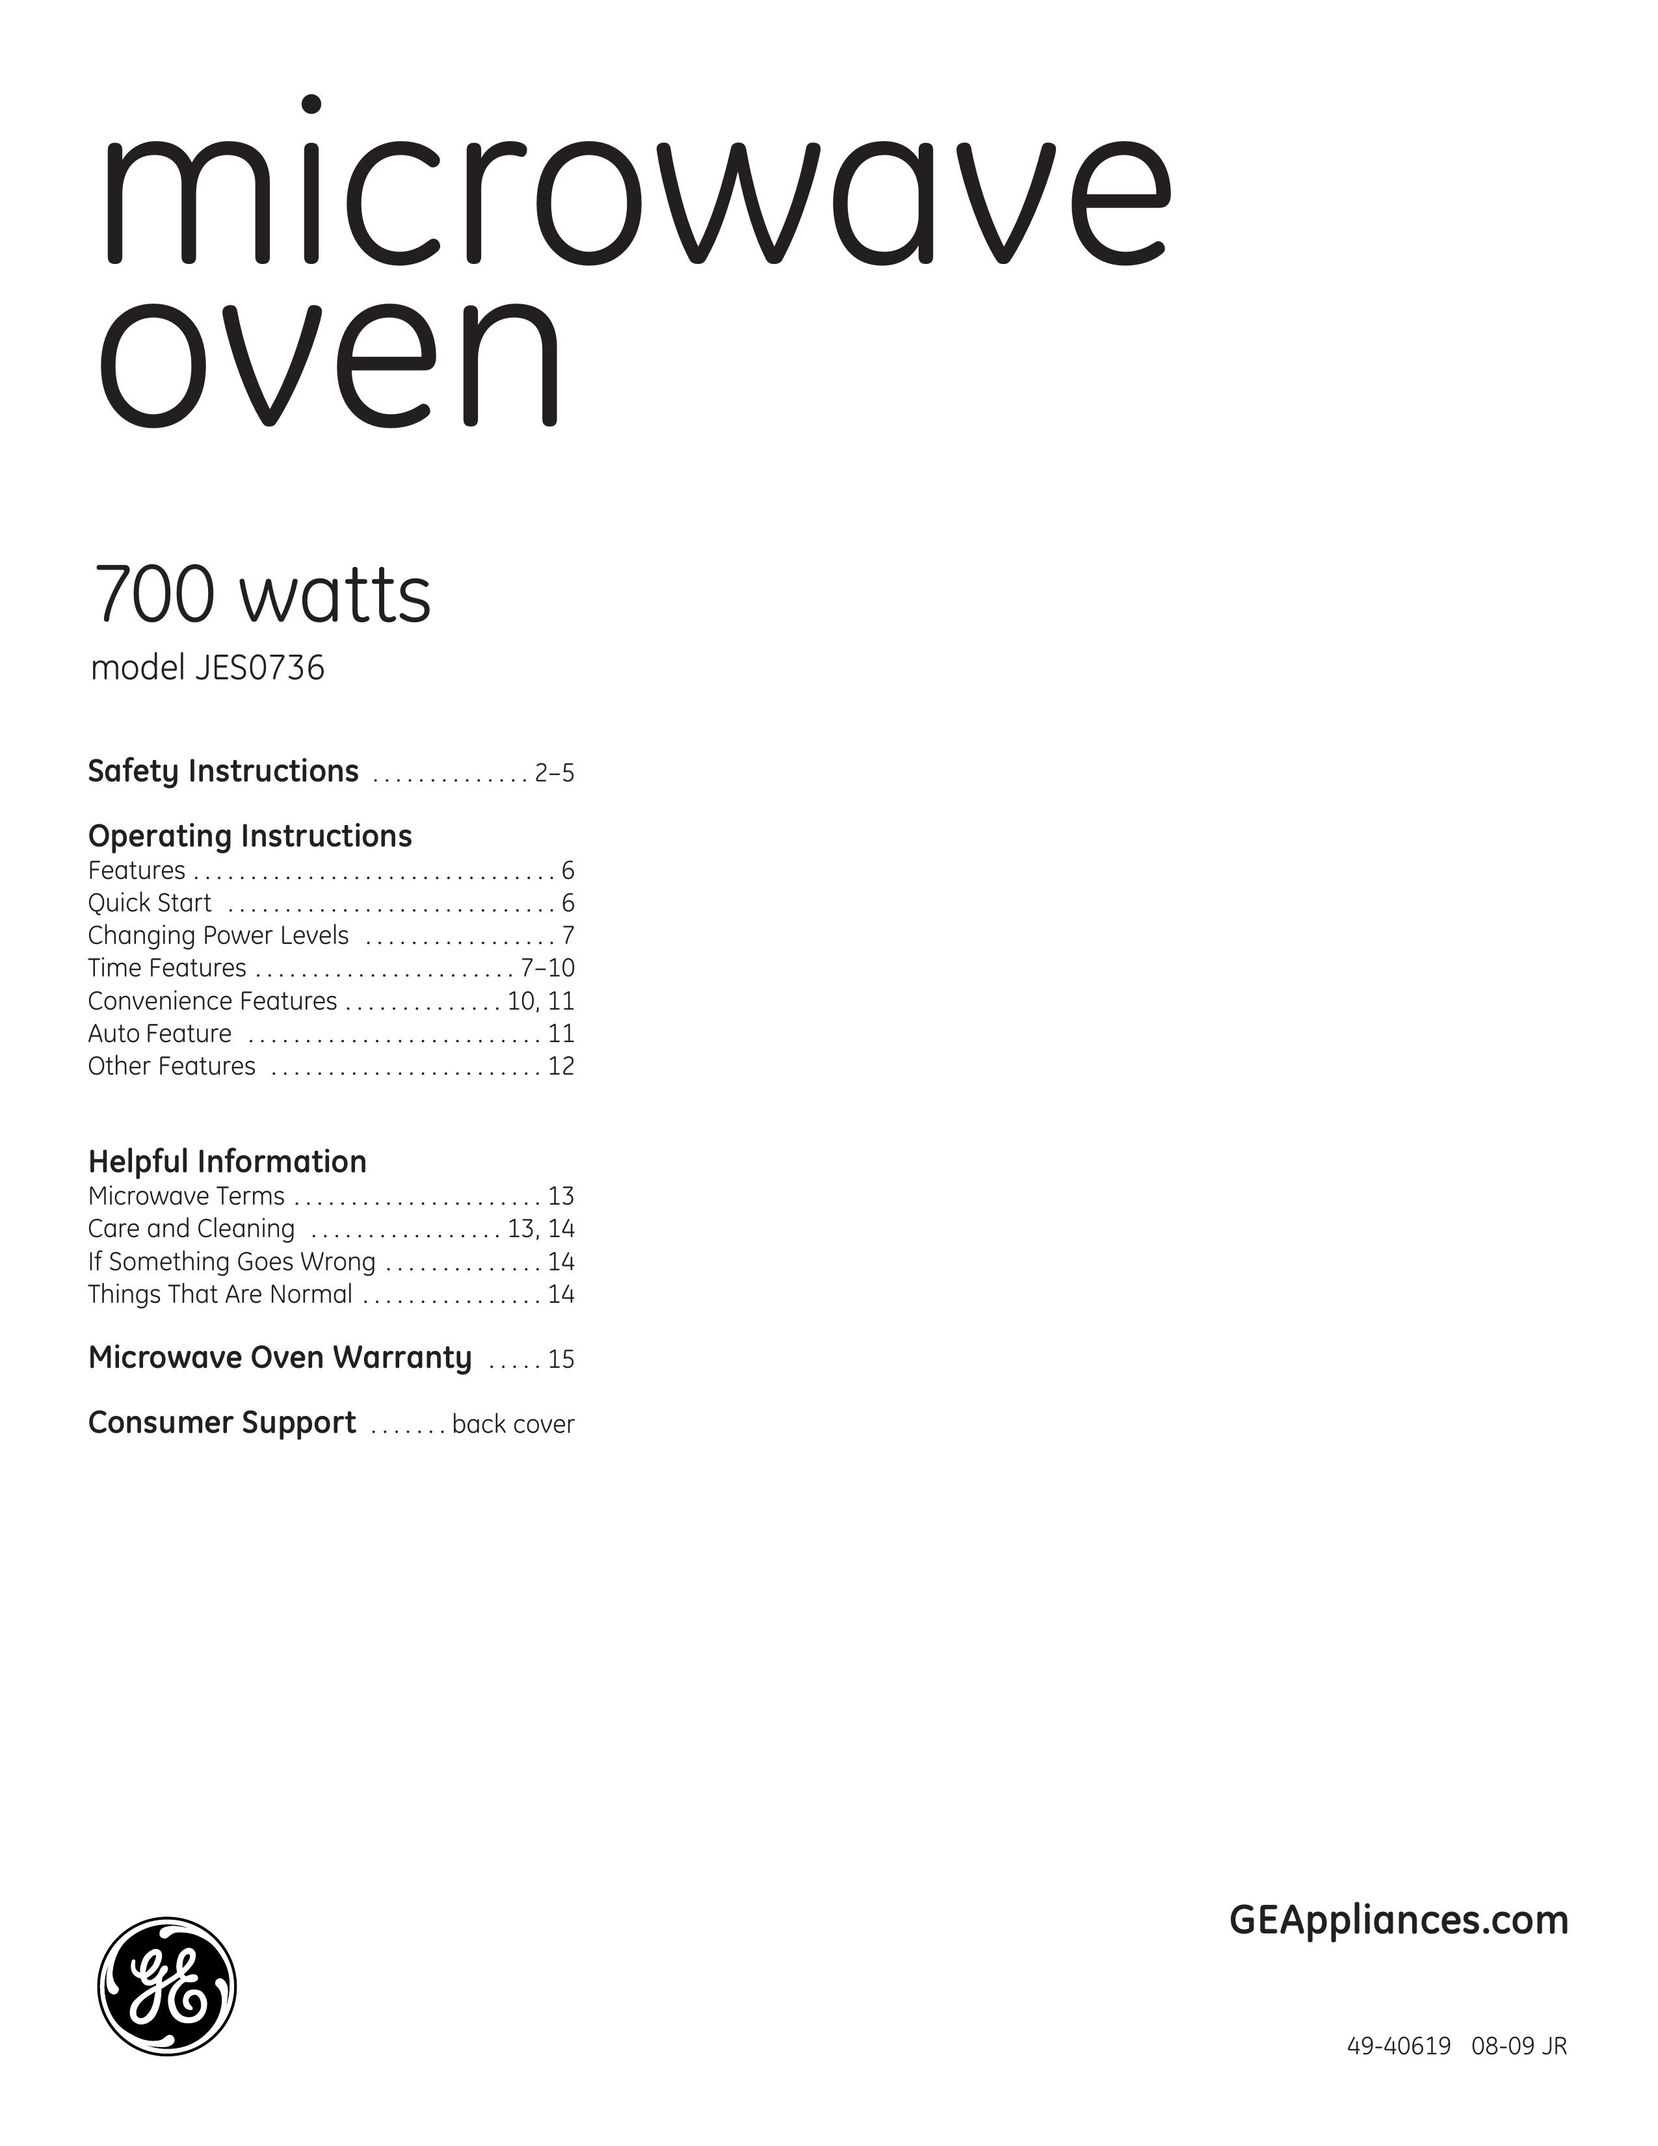 GE 9500DW Microwave Oven User Manual